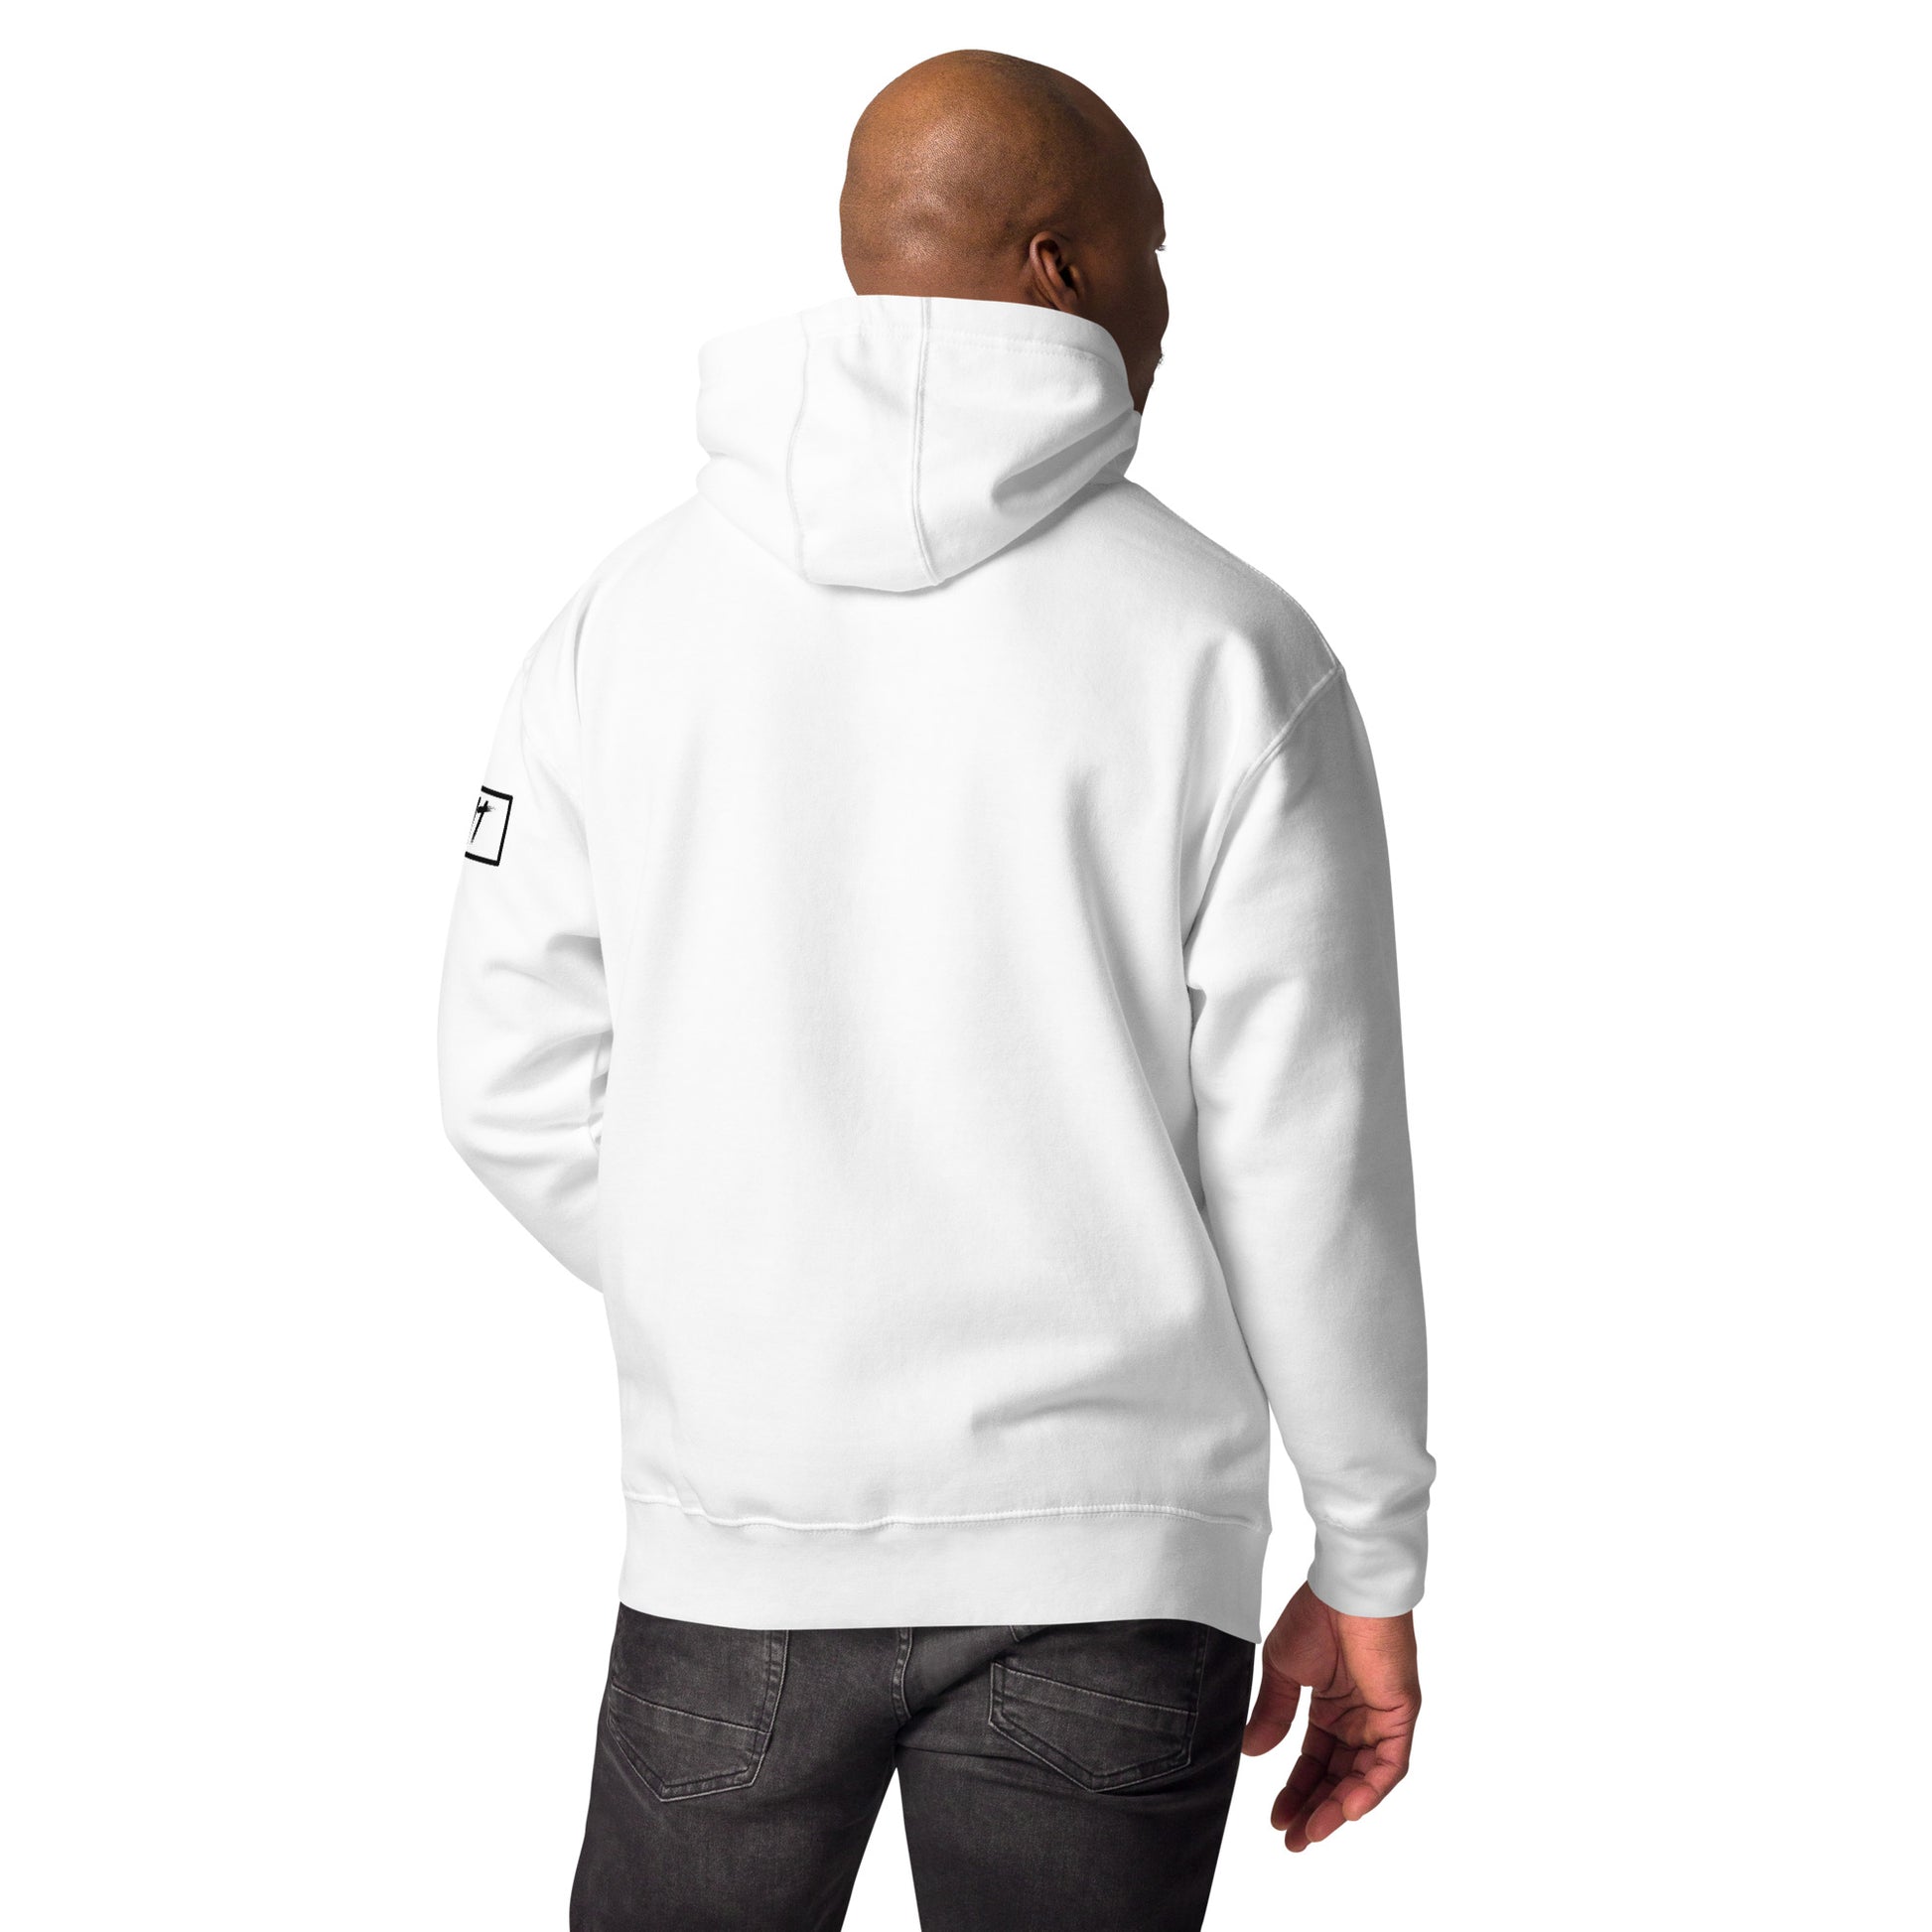 Back-Side view of Storm Castle Peak in Custer Gallatin National Forest Montana White Hoodies for Men from Park Attire